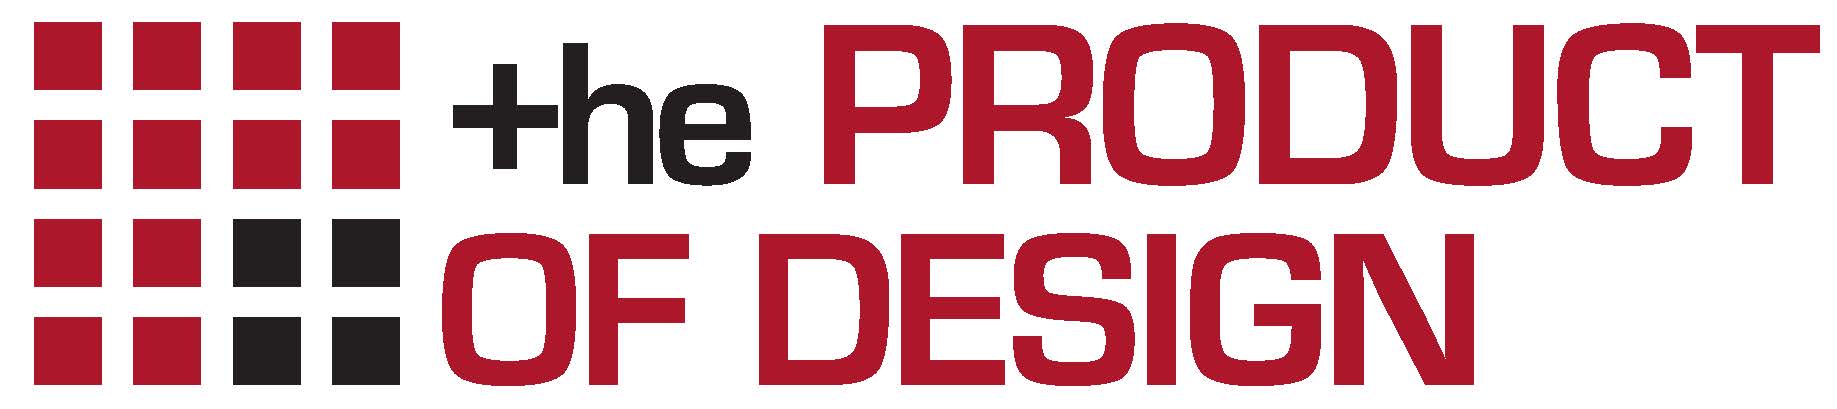 The Product of Design logo